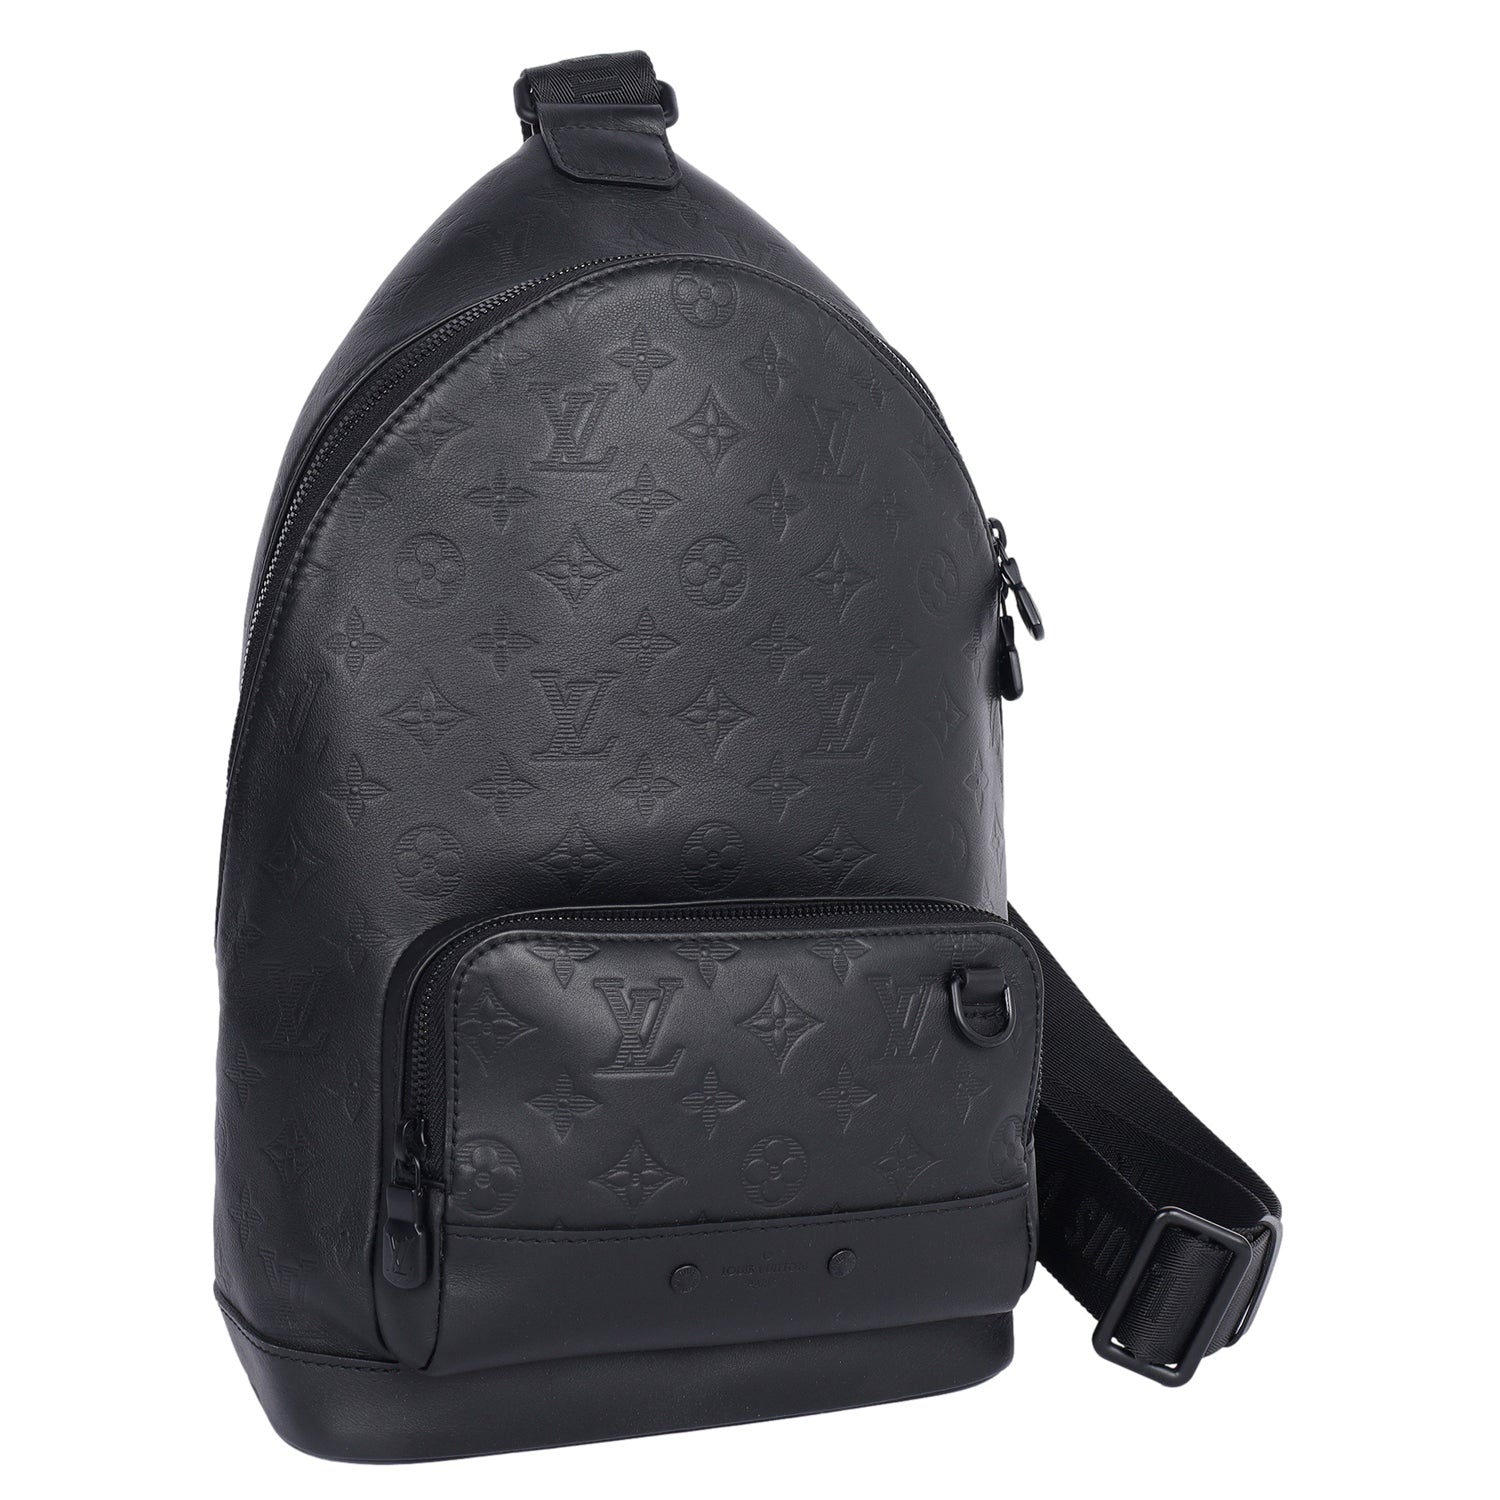 Preowned Authentic Louis Vuitton Monogram Eclipse Apollo Backpack Model